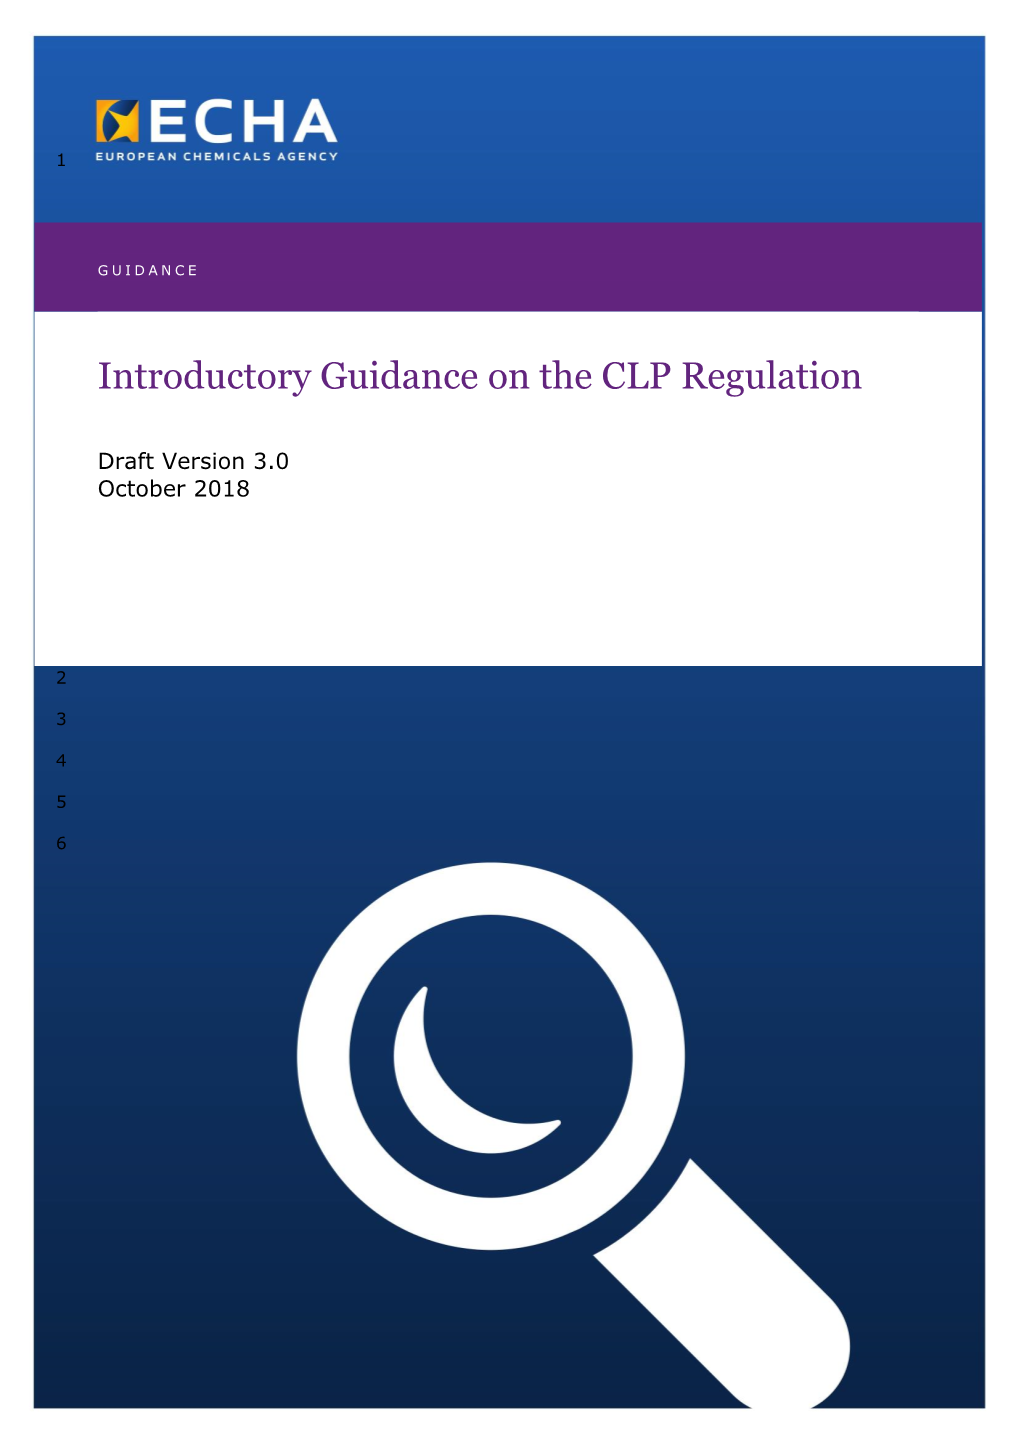 Introductory Guidance on the CLP Regulation 1 Draft Version 3.0 - October 2018 (Public)